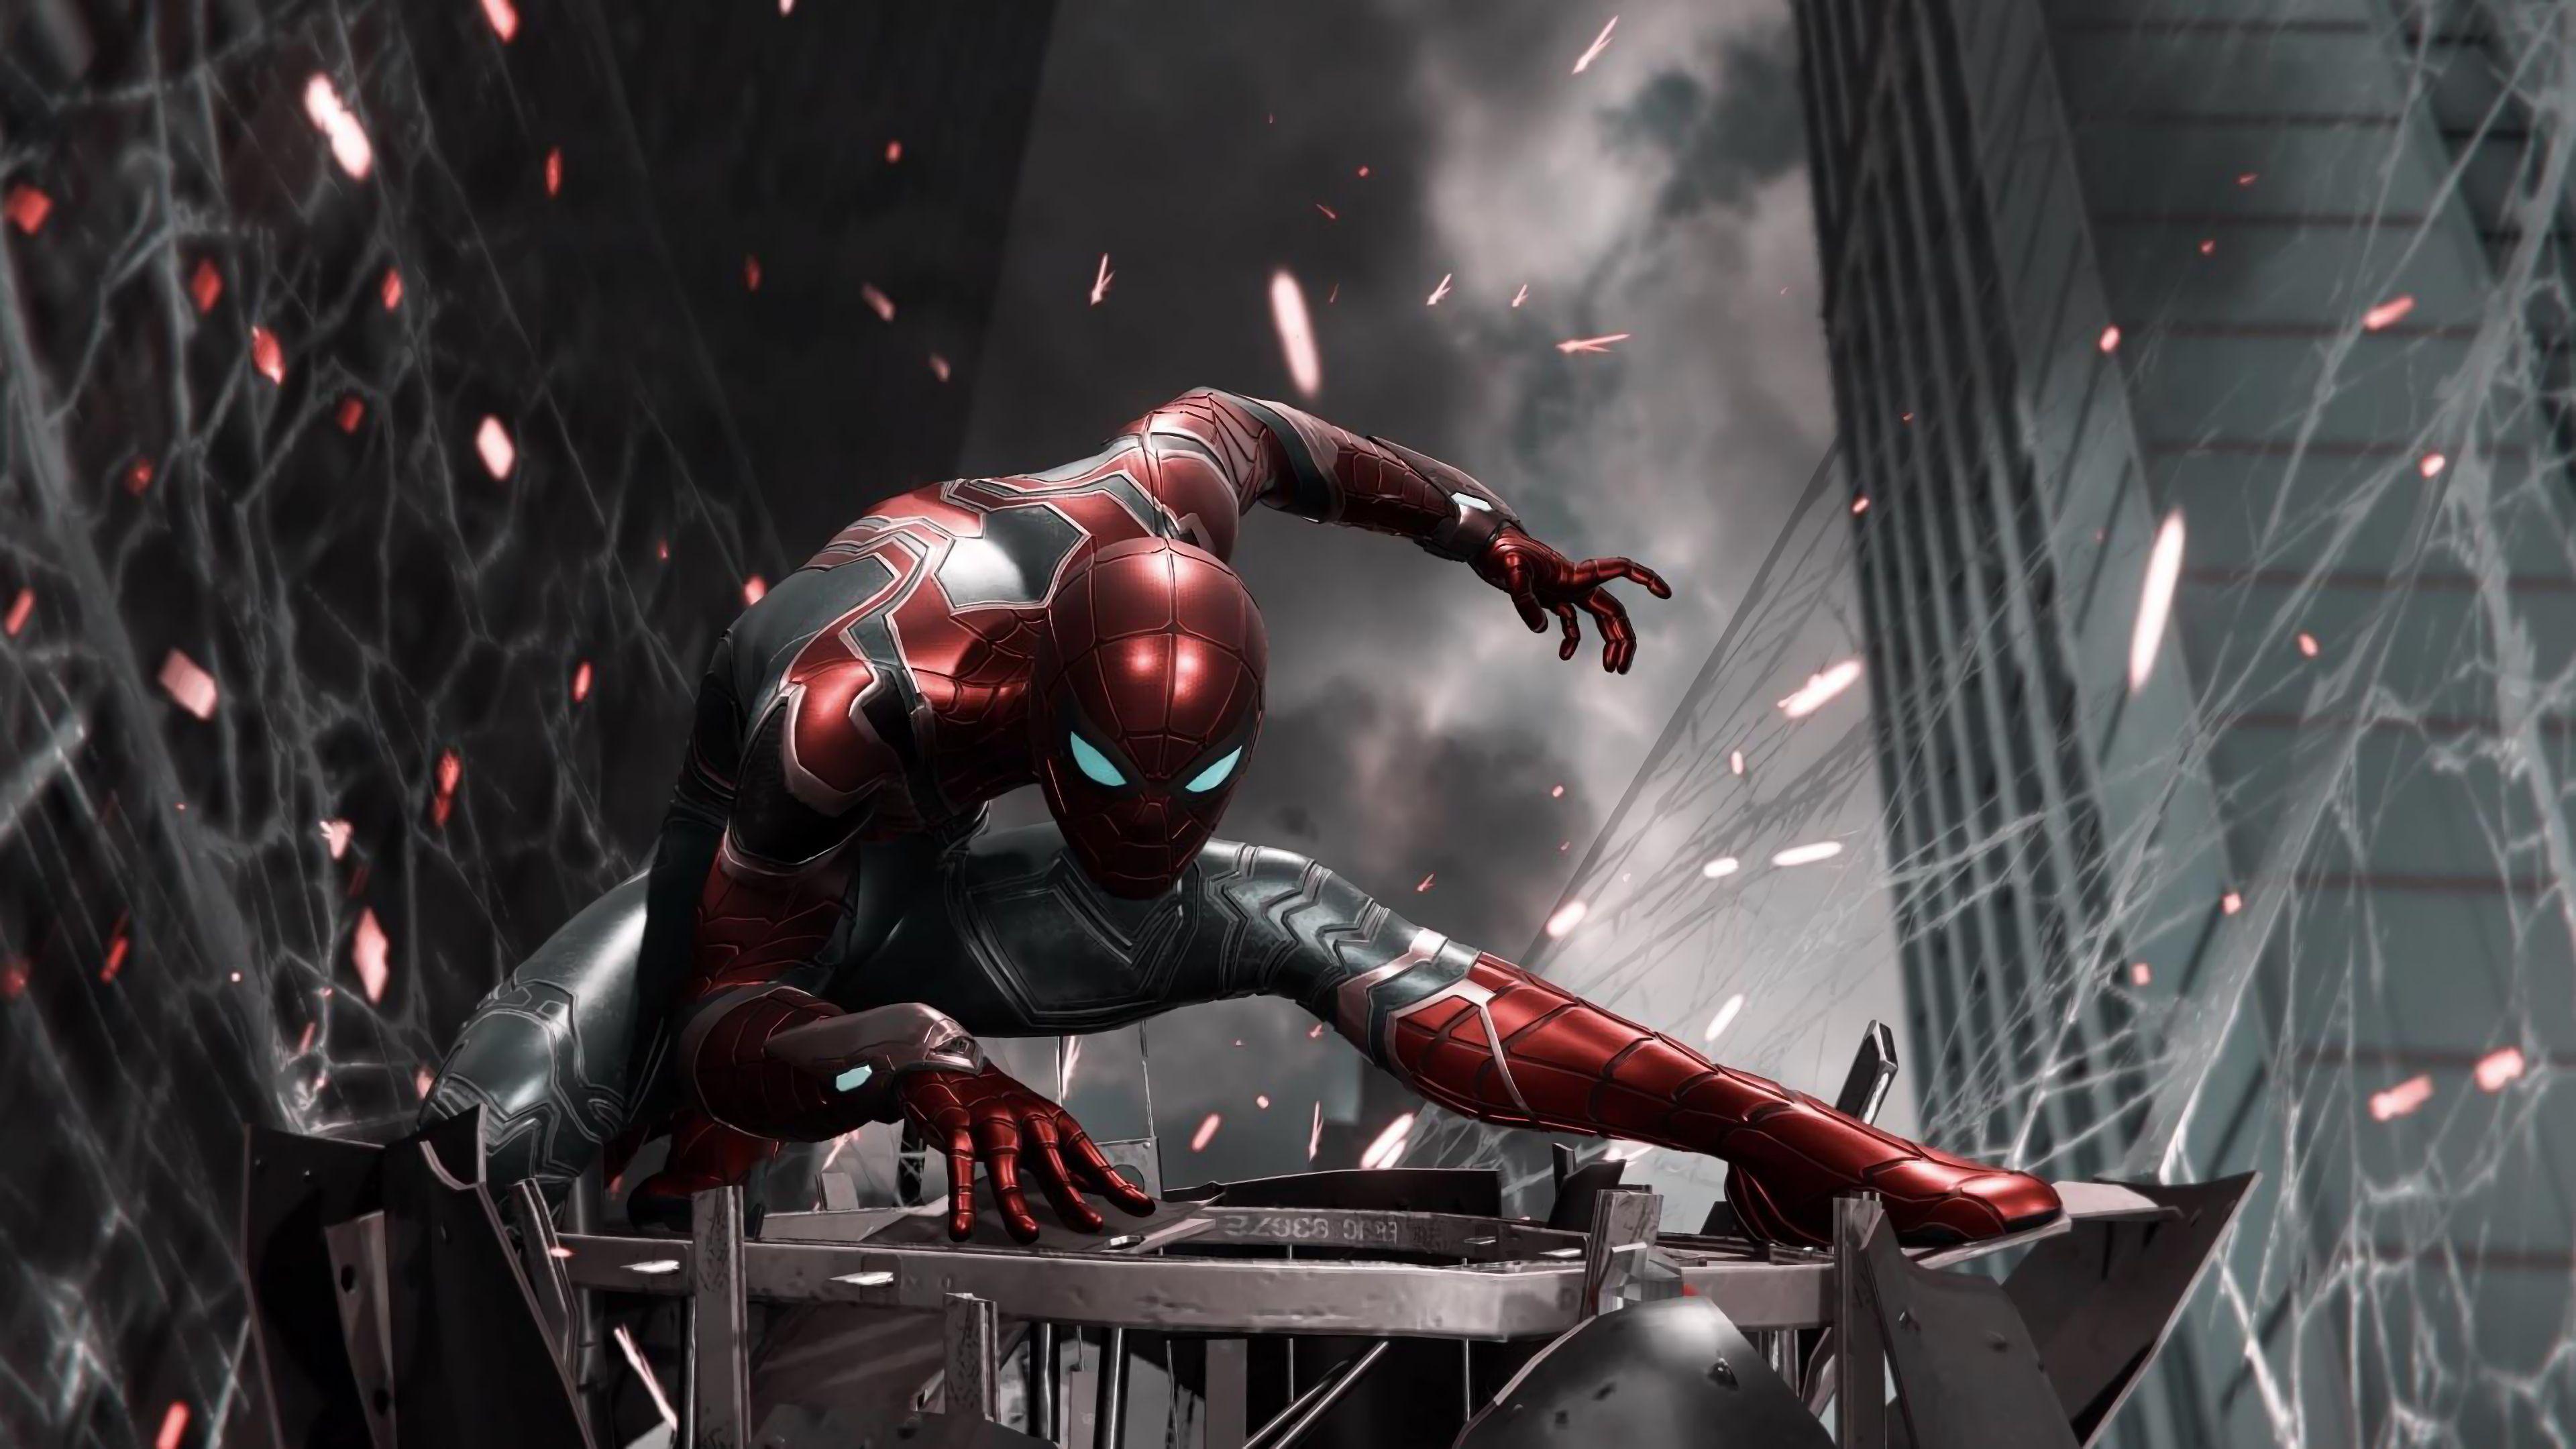 Spiderman with new suit Wallpaper 4k Ultra HD ID:6295